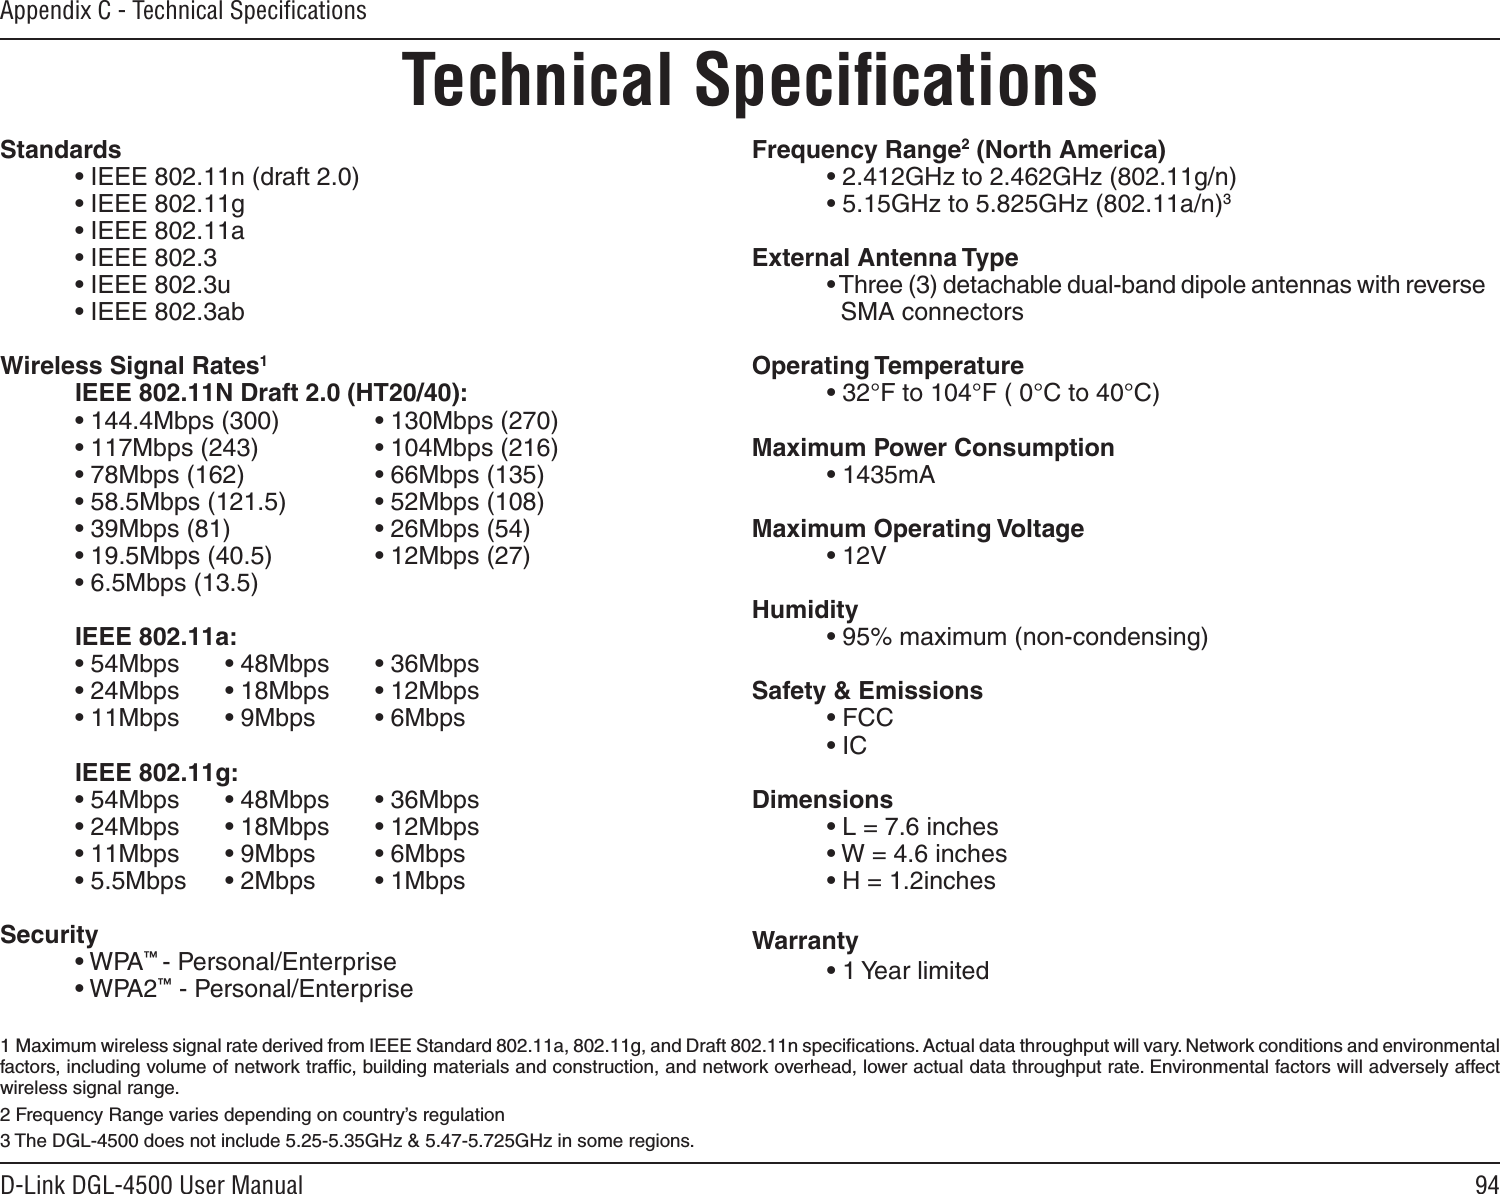 94D-Link DGL-4500 User ManualAppendix C - Technical SpeciﬁcationsTechnical SpeciﬁcationsStandards  • IEEE 802.11n (draft 2.0)  • IEEE 802.11g  • IEEE 802.11a  • IEEE 802.3  • IEEE 802.3u  • IEEE 802.3abWireless Signal Rates1  IEEE 802.11N Draft 2.0 (HT20/40):  • 144.4Mbps (300)    • 130Mbps (270)  • 117Mbps (243)    • 104Mbps (216)  • 78Mbps (162)    • 66Mbps (135)  • 58.5Mbps (121.5)    • 52Mbps (108)  • 39Mbps (81)    • 26Mbps (54)  • 19.5Mbps (40.5)    • 12Mbps (27)  • 6.5Mbps (13.5)  IEEE 802.11a:  • 54Mbps  • 48Mbps  • 36Mbps  • 24Mbps  • 18Mbps  • 12Mbps  • 11Mbps  • 9Mbps  • 6Mbps  IEEE 802.11g:  • 54Mbps  • 48Mbps  • 36Mbps  • 24Mbps  • 18Mbps  • 12Mbps  • 11Mbps  • 9Mbps  • 6Mbps  • 5.5Mbps  • 2Mbps  • 1Mbps Security  • WPA™ - Personal/Enterprise  • WPA2™ - Personal/EnterpriseFrequency Range2 (North America)  • 2.412GHz to 2.462GHz (802.11g/n)  • 5.15GHz to 5.825GHz (802.11a/n)3External Antenna Type  • Three (3) detachable dual-band dipole antennas with reverse      SMA connectorsOperating Temperature  • 32°F to 104°F ( 0°C to 40°C)Maximum Power Consumption  • 1435mAMaximum Operating Voltage  • 12VHumidity  • 95% maximum (non-condensing)Safety &amp; Emissions  • FCC    • IC Dimensions  • L = 7.6 inches  • W = 4.6 inches  • H = 1.2inchesWarranty  • 1 Year limited1  Maximum wireless signal rate derived from IEEE Standard 802.11a, 802.11g, and Draft 802.11n speciﬁcations. Actual data throughput will vary. Network conditions and environmental factors, including volume of network trafﬁc, building materials and construction, and network overhead, lower actual data throughput rate. Environmental factors will adversely affect wireless signal range.2 Frequency Range varies depending on country’s regulation3 The DGL-4500 does not include 5.25-5.35GHz &amp; 5.47-5.725GHz in some regions.